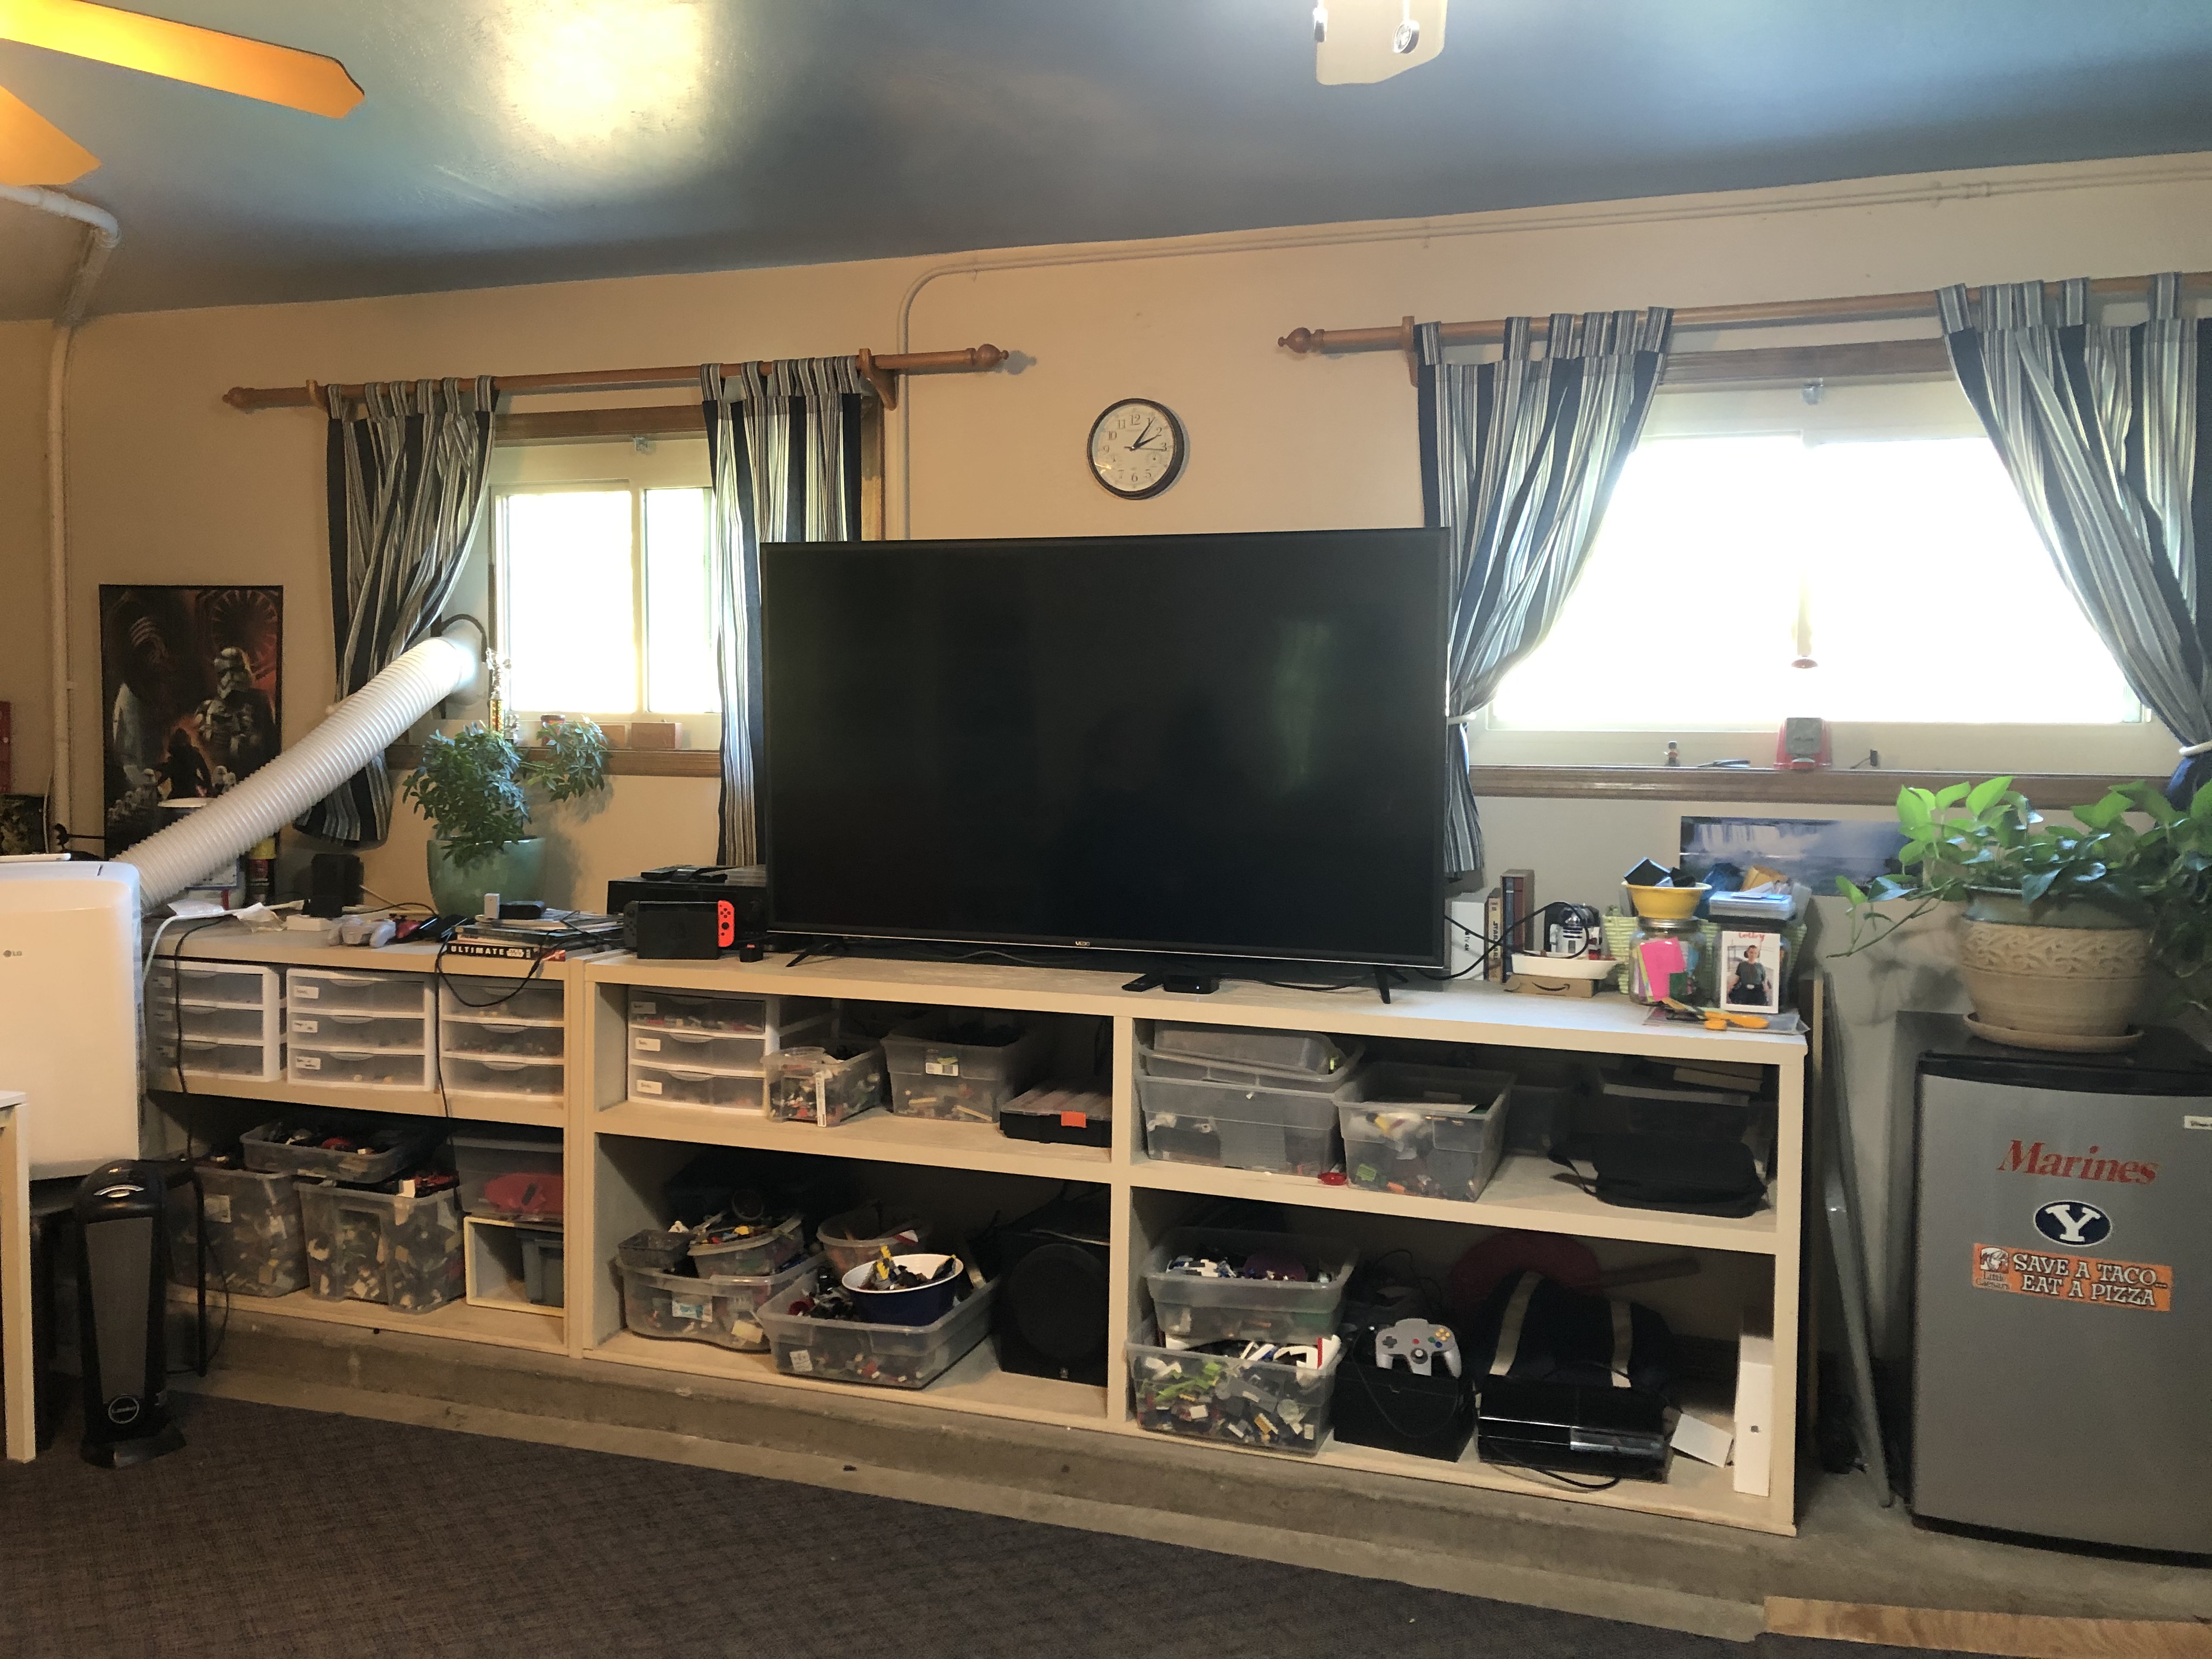 Image of the mancave TV area